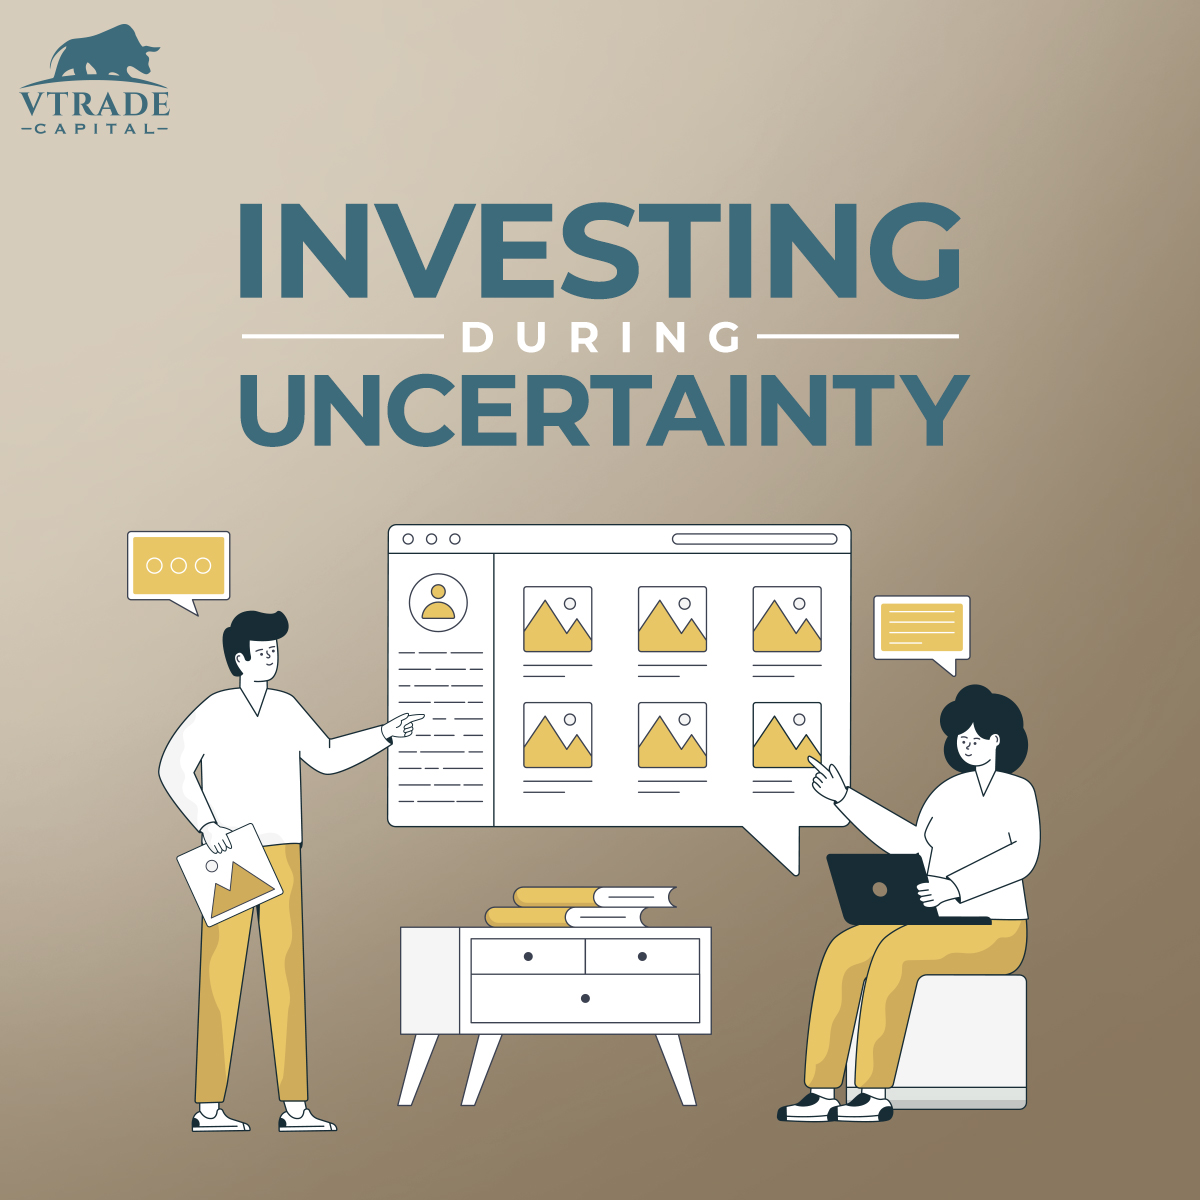 Stay focused in uncertain markets! Avoid impulsive decisions, diversify your portfolio, and seek reliable sources. Embrace adaptability, learn from setbacks, and believe in portfolio resilience. Navigate with confidence! 

#EconomicUncertainty #Investing #Volatility